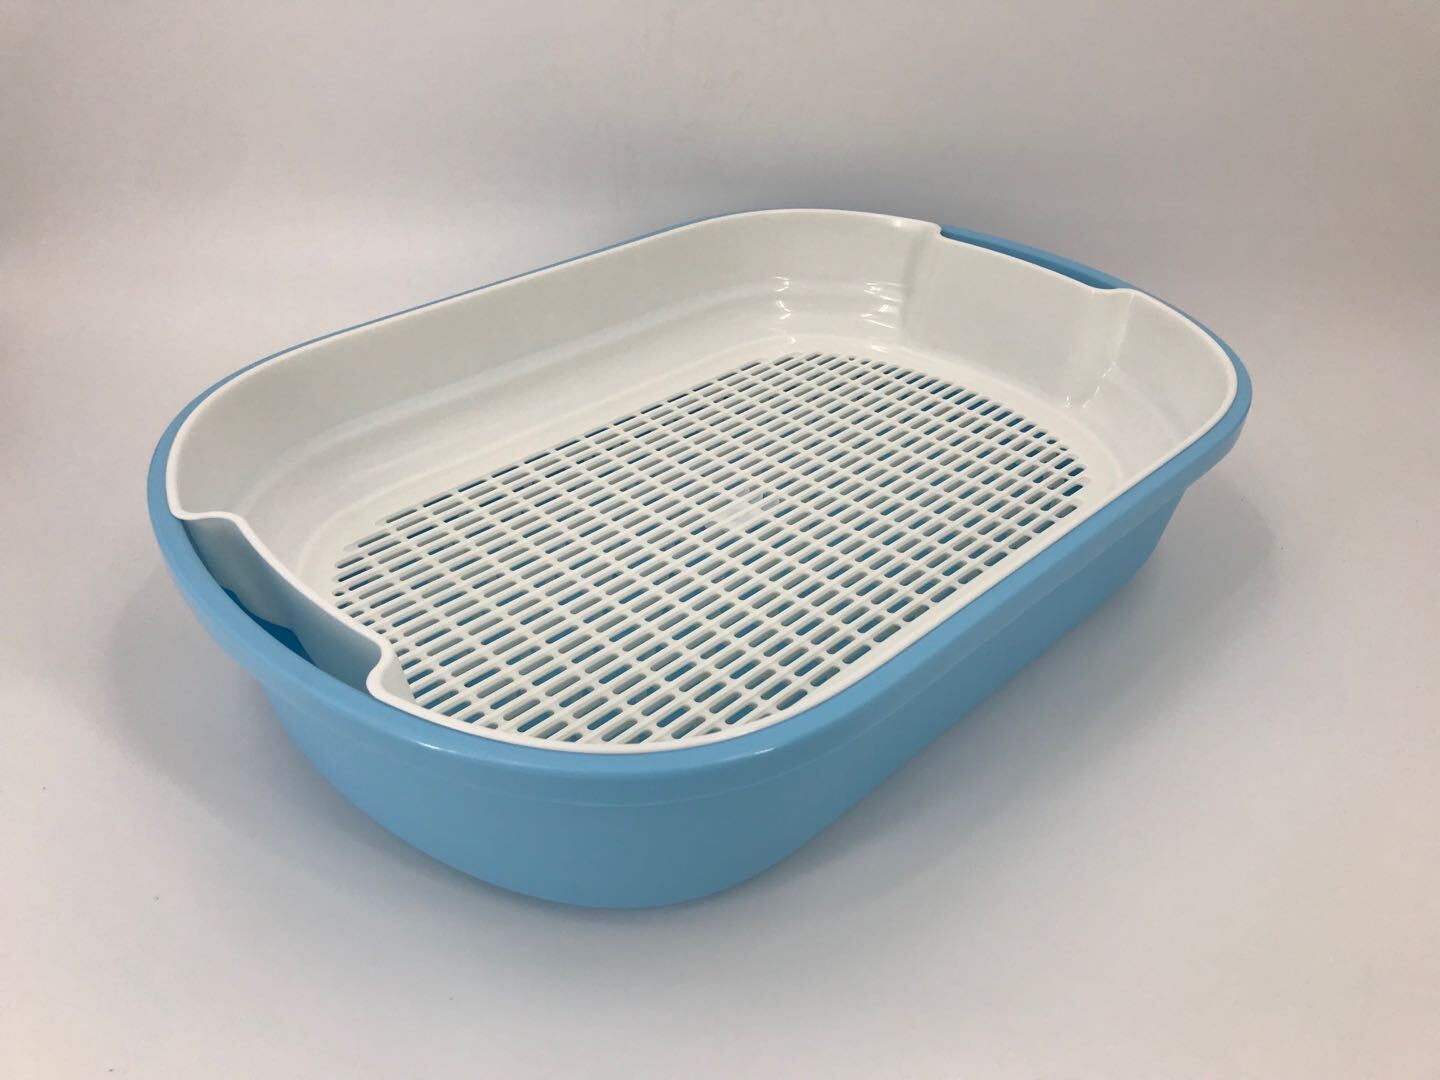 Large Portable Cat Toilet Litter Box Tray House with Scoop and Grid Tray Blue